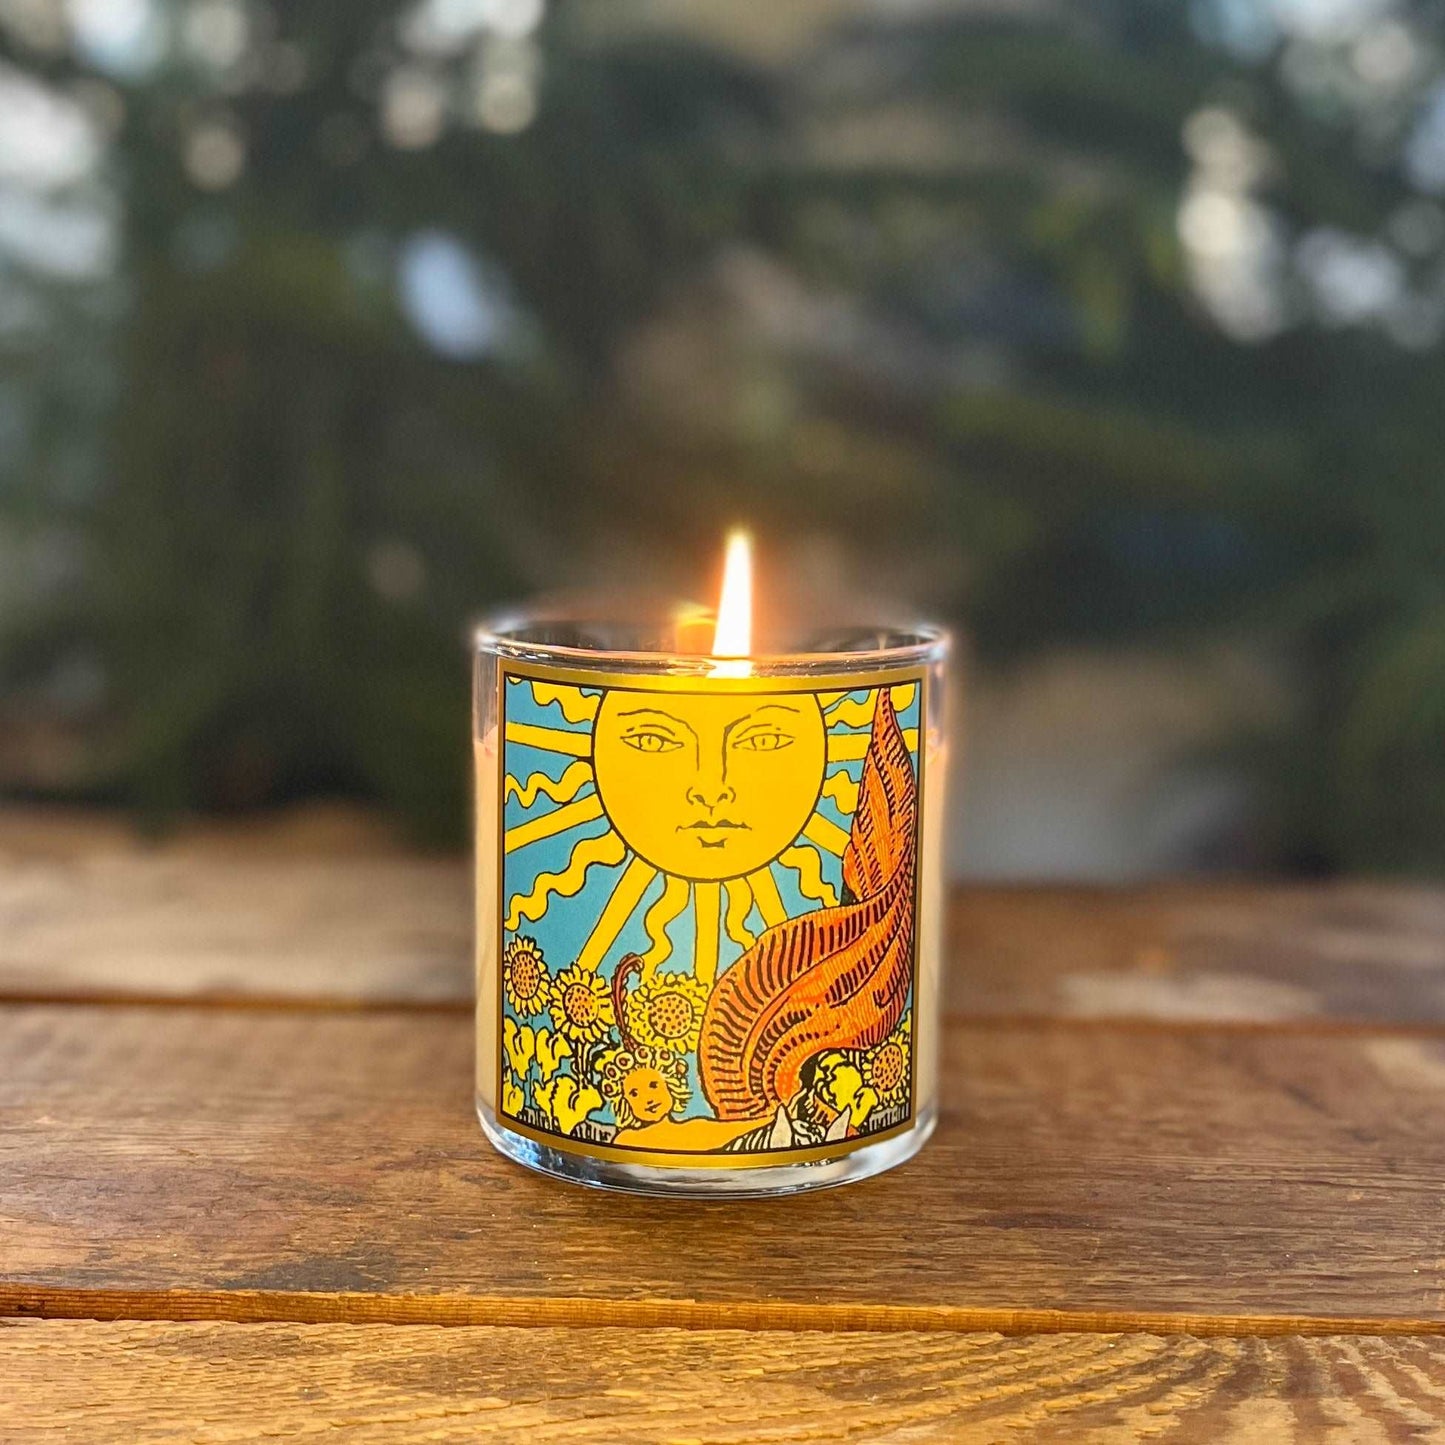 8.5 oz Natural GMM-Free Soy Wax The Sun Tarot Candle for Positivity, Radiance, and Aromatherapy with Organic Orange, Bergamot, Grapefruit Essential Oils and Amethyst Crystal